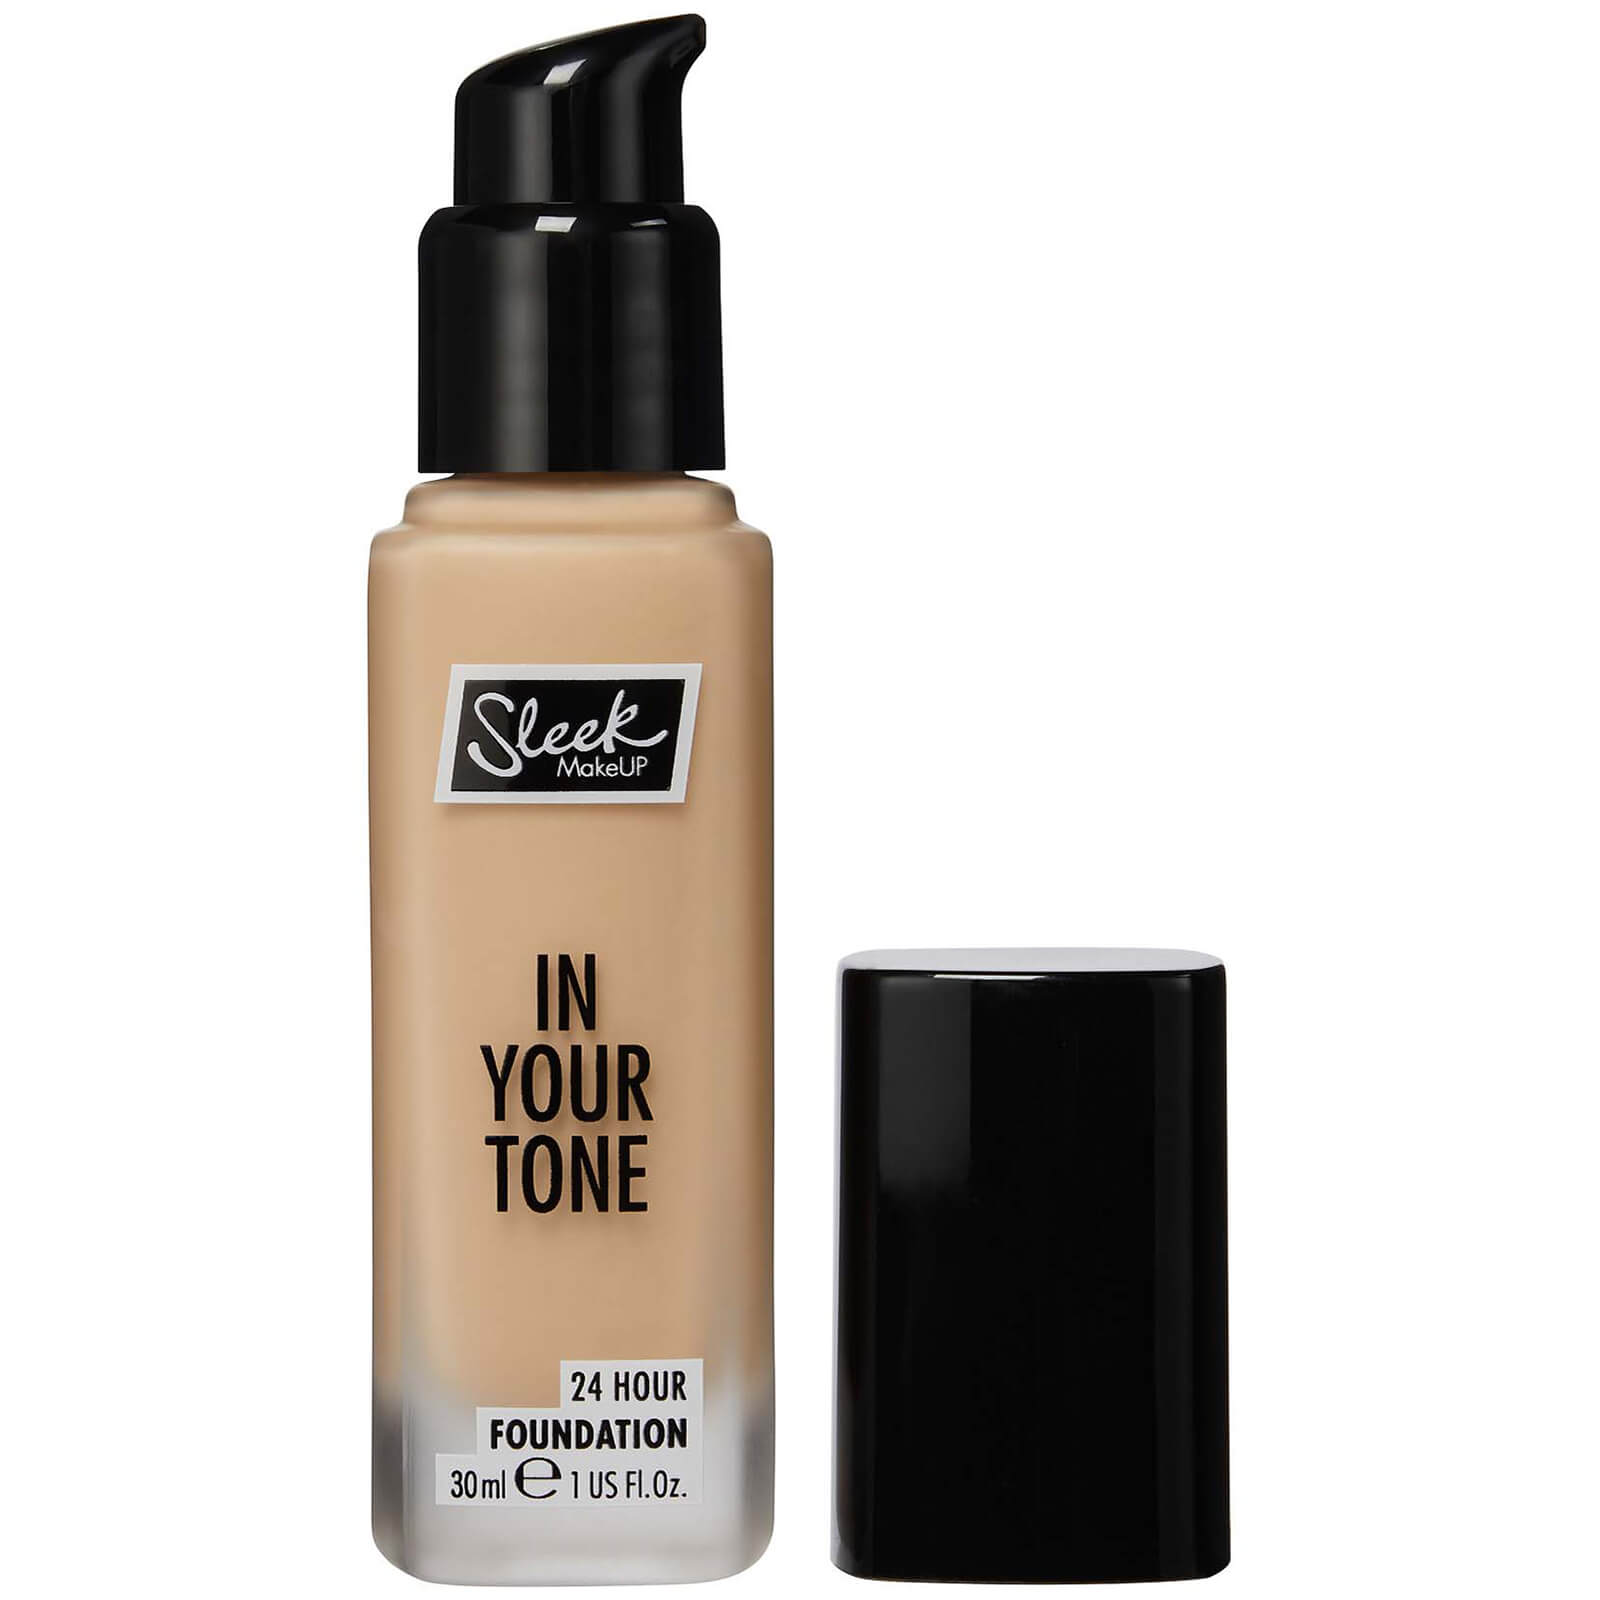 Sleek MakeUP in Your Tone 24 Hour Foundation 30ml (Various Shades) - 4W